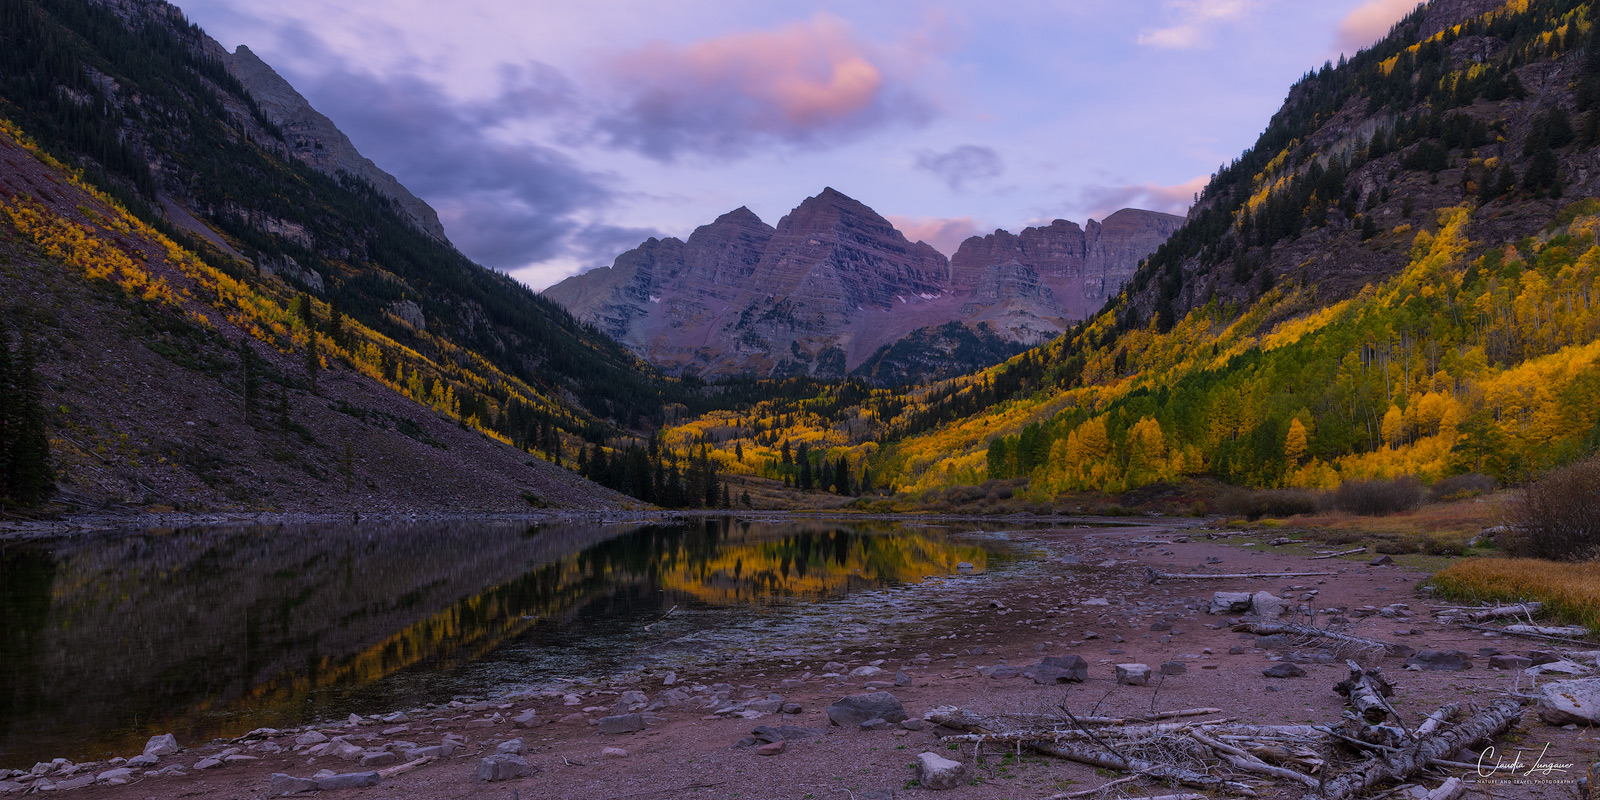 Sunrise at Maroon Lake with view of Maroon Bells.